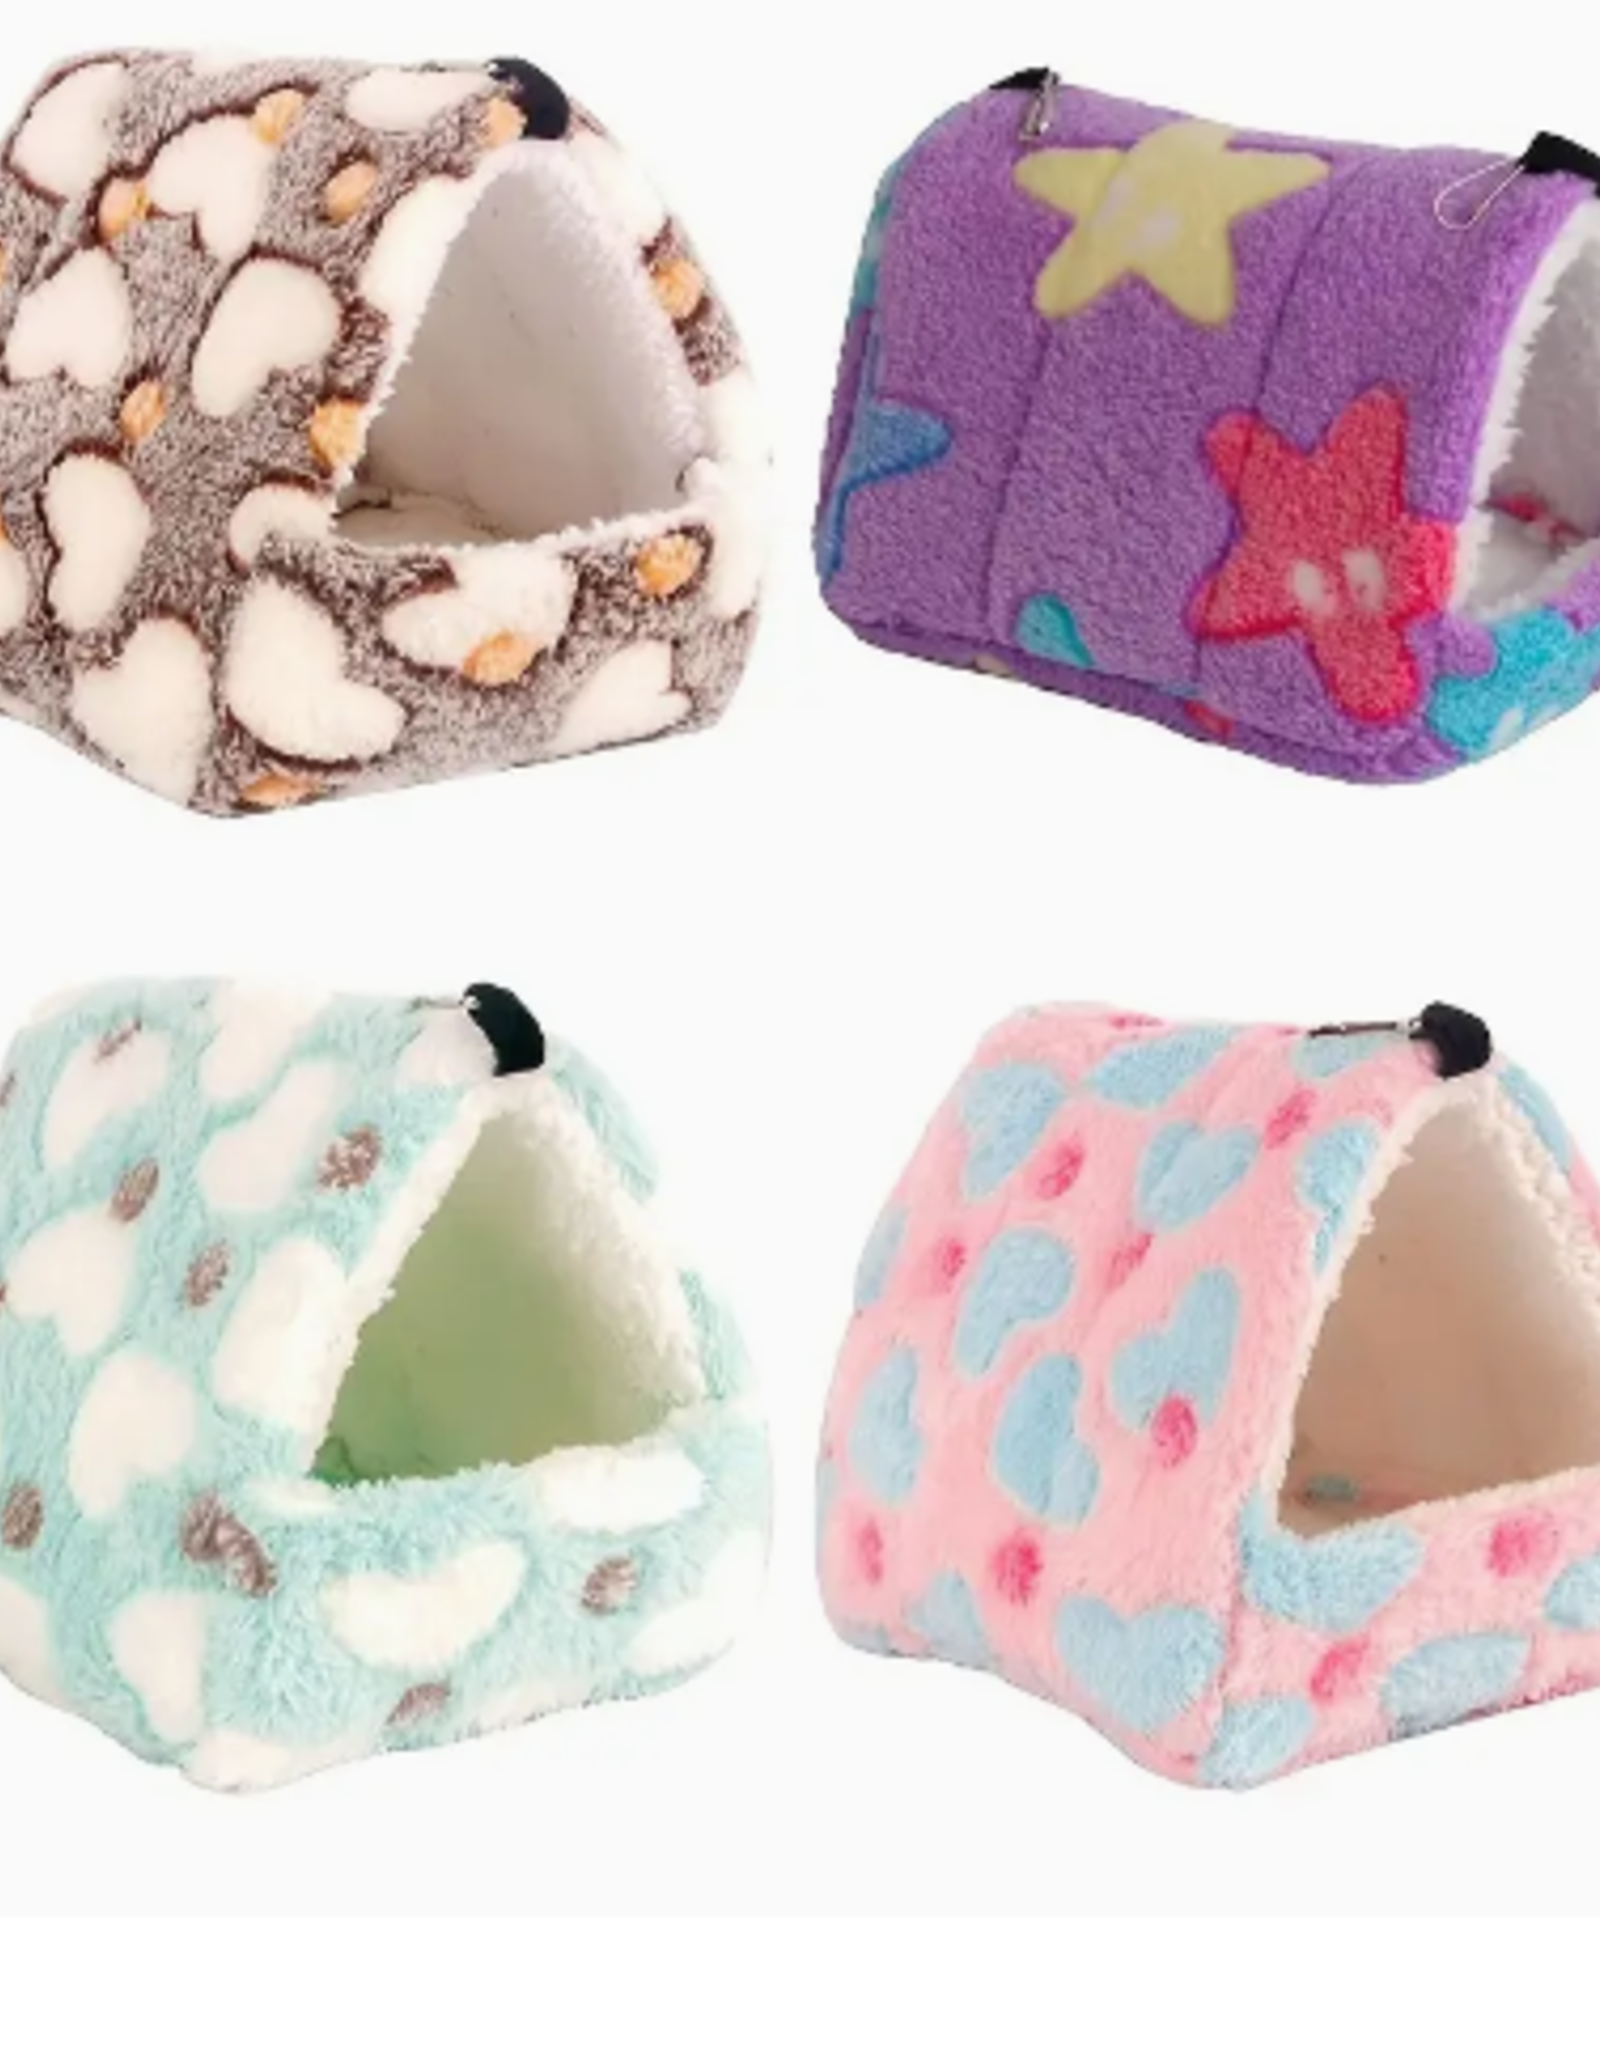 SMALL ANIMAL BED- FLEECE- 5X4X4- ASSORTED COLORS